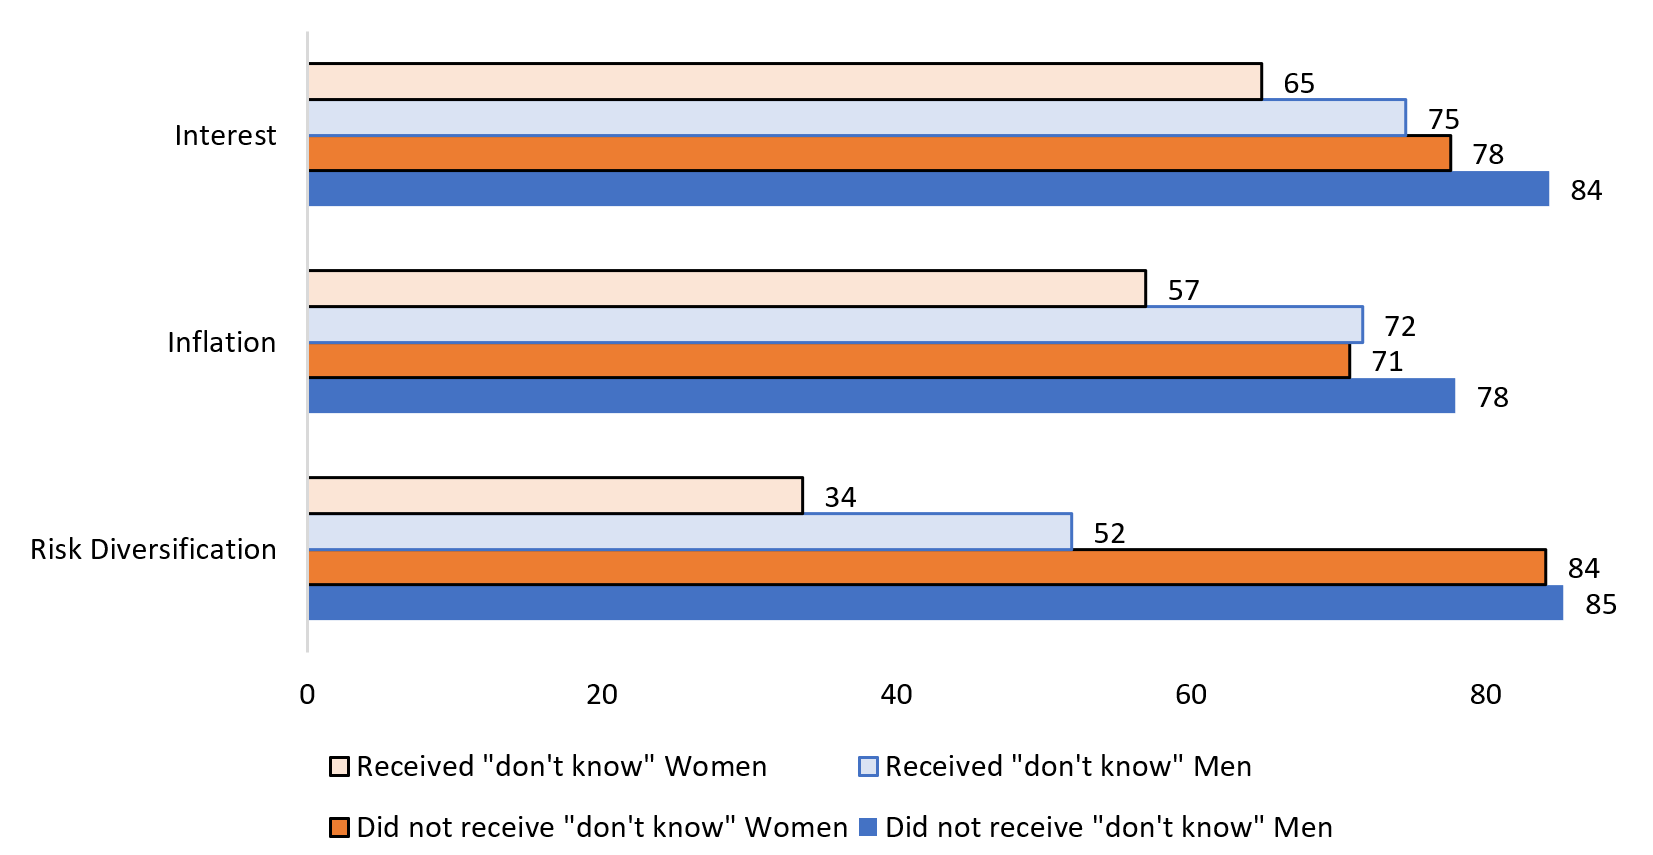 Figure 2. Share correct, by gender and whether respondent received the "don't know" option. See accessible link for data.